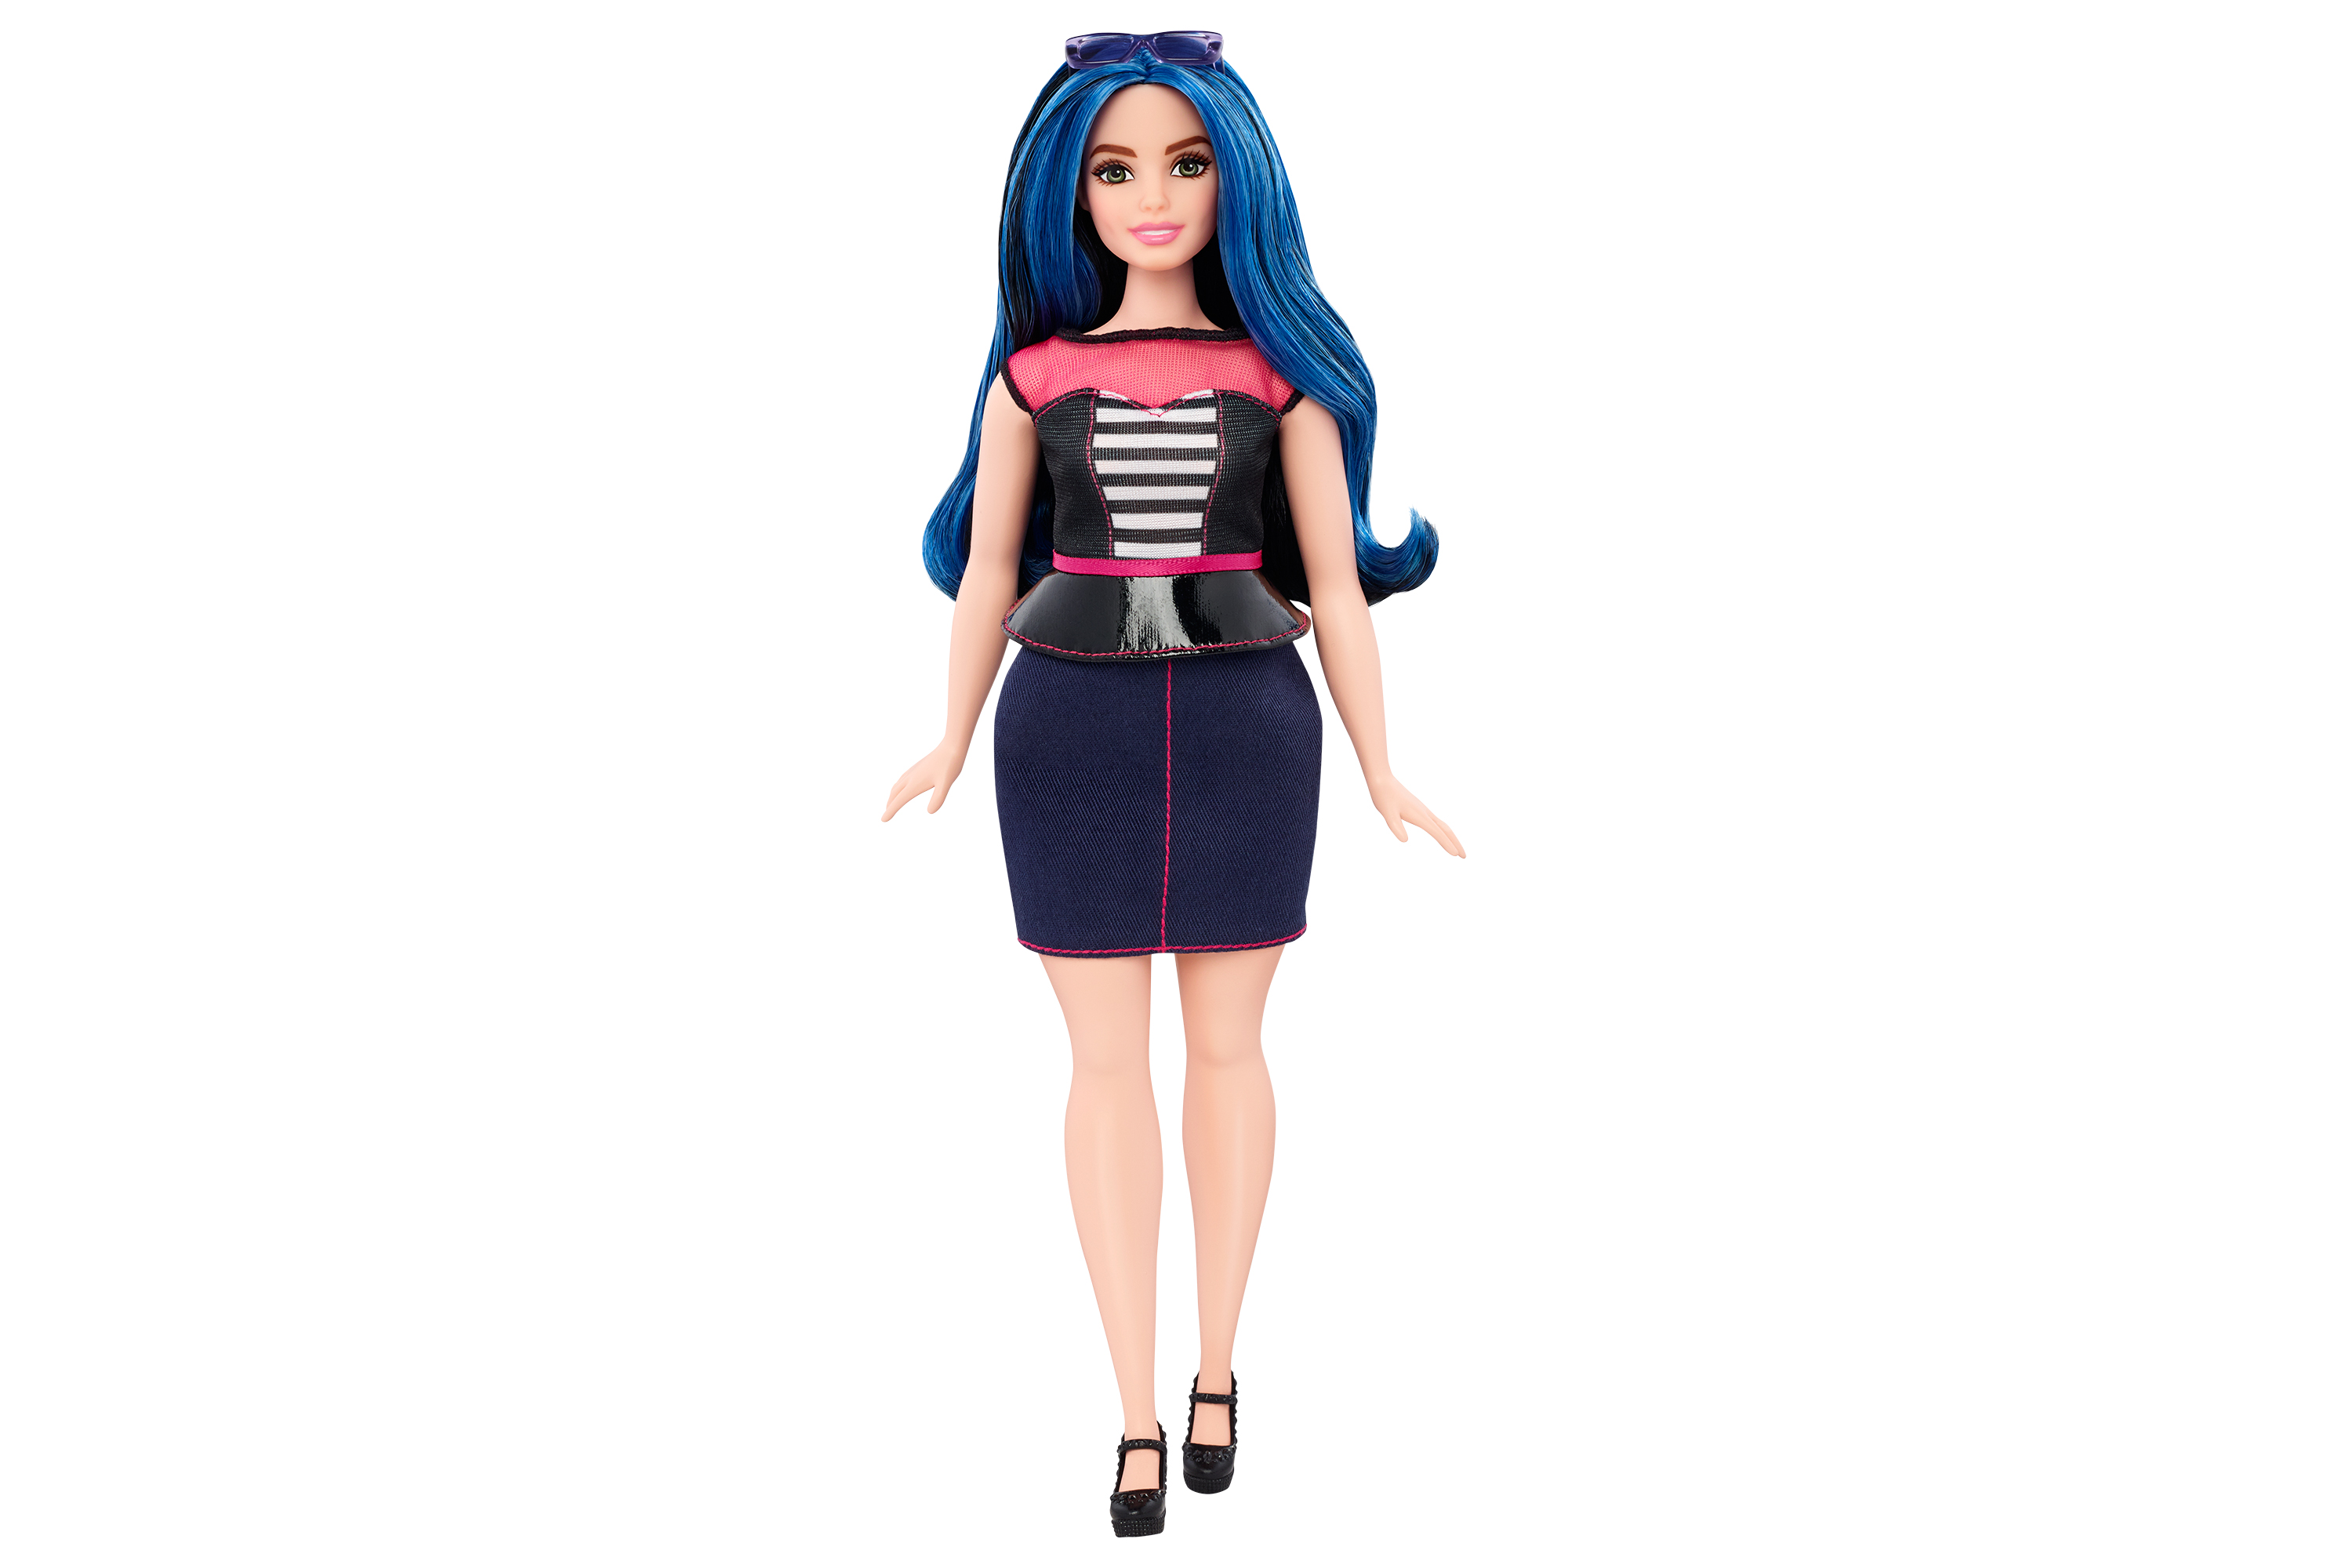 One of Mattel's new Curvy Barbies